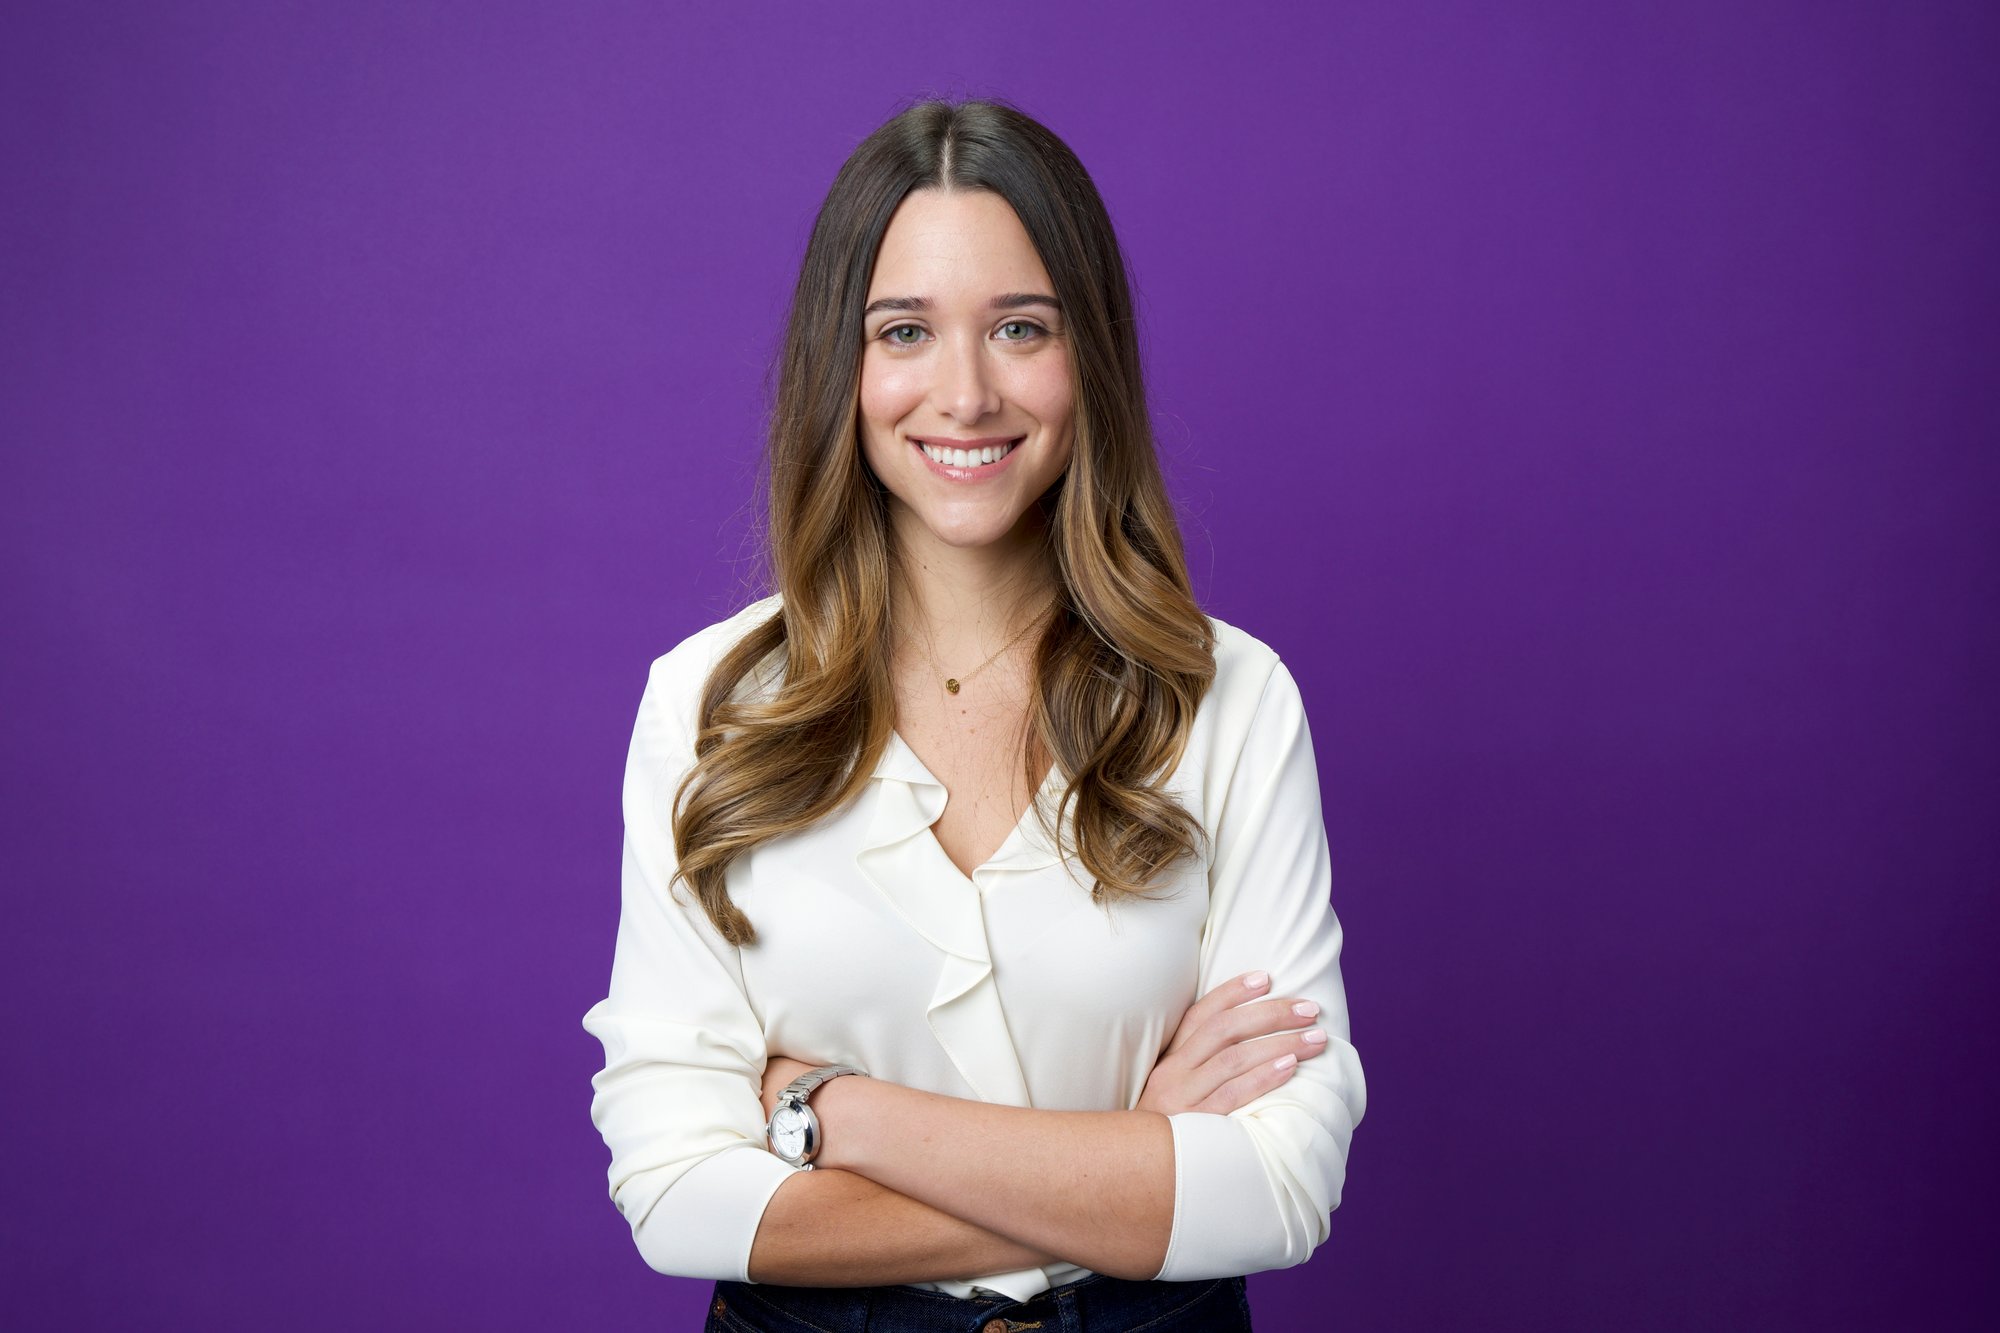 Bianca Padilla, CEO and Co-Founder of Carewll